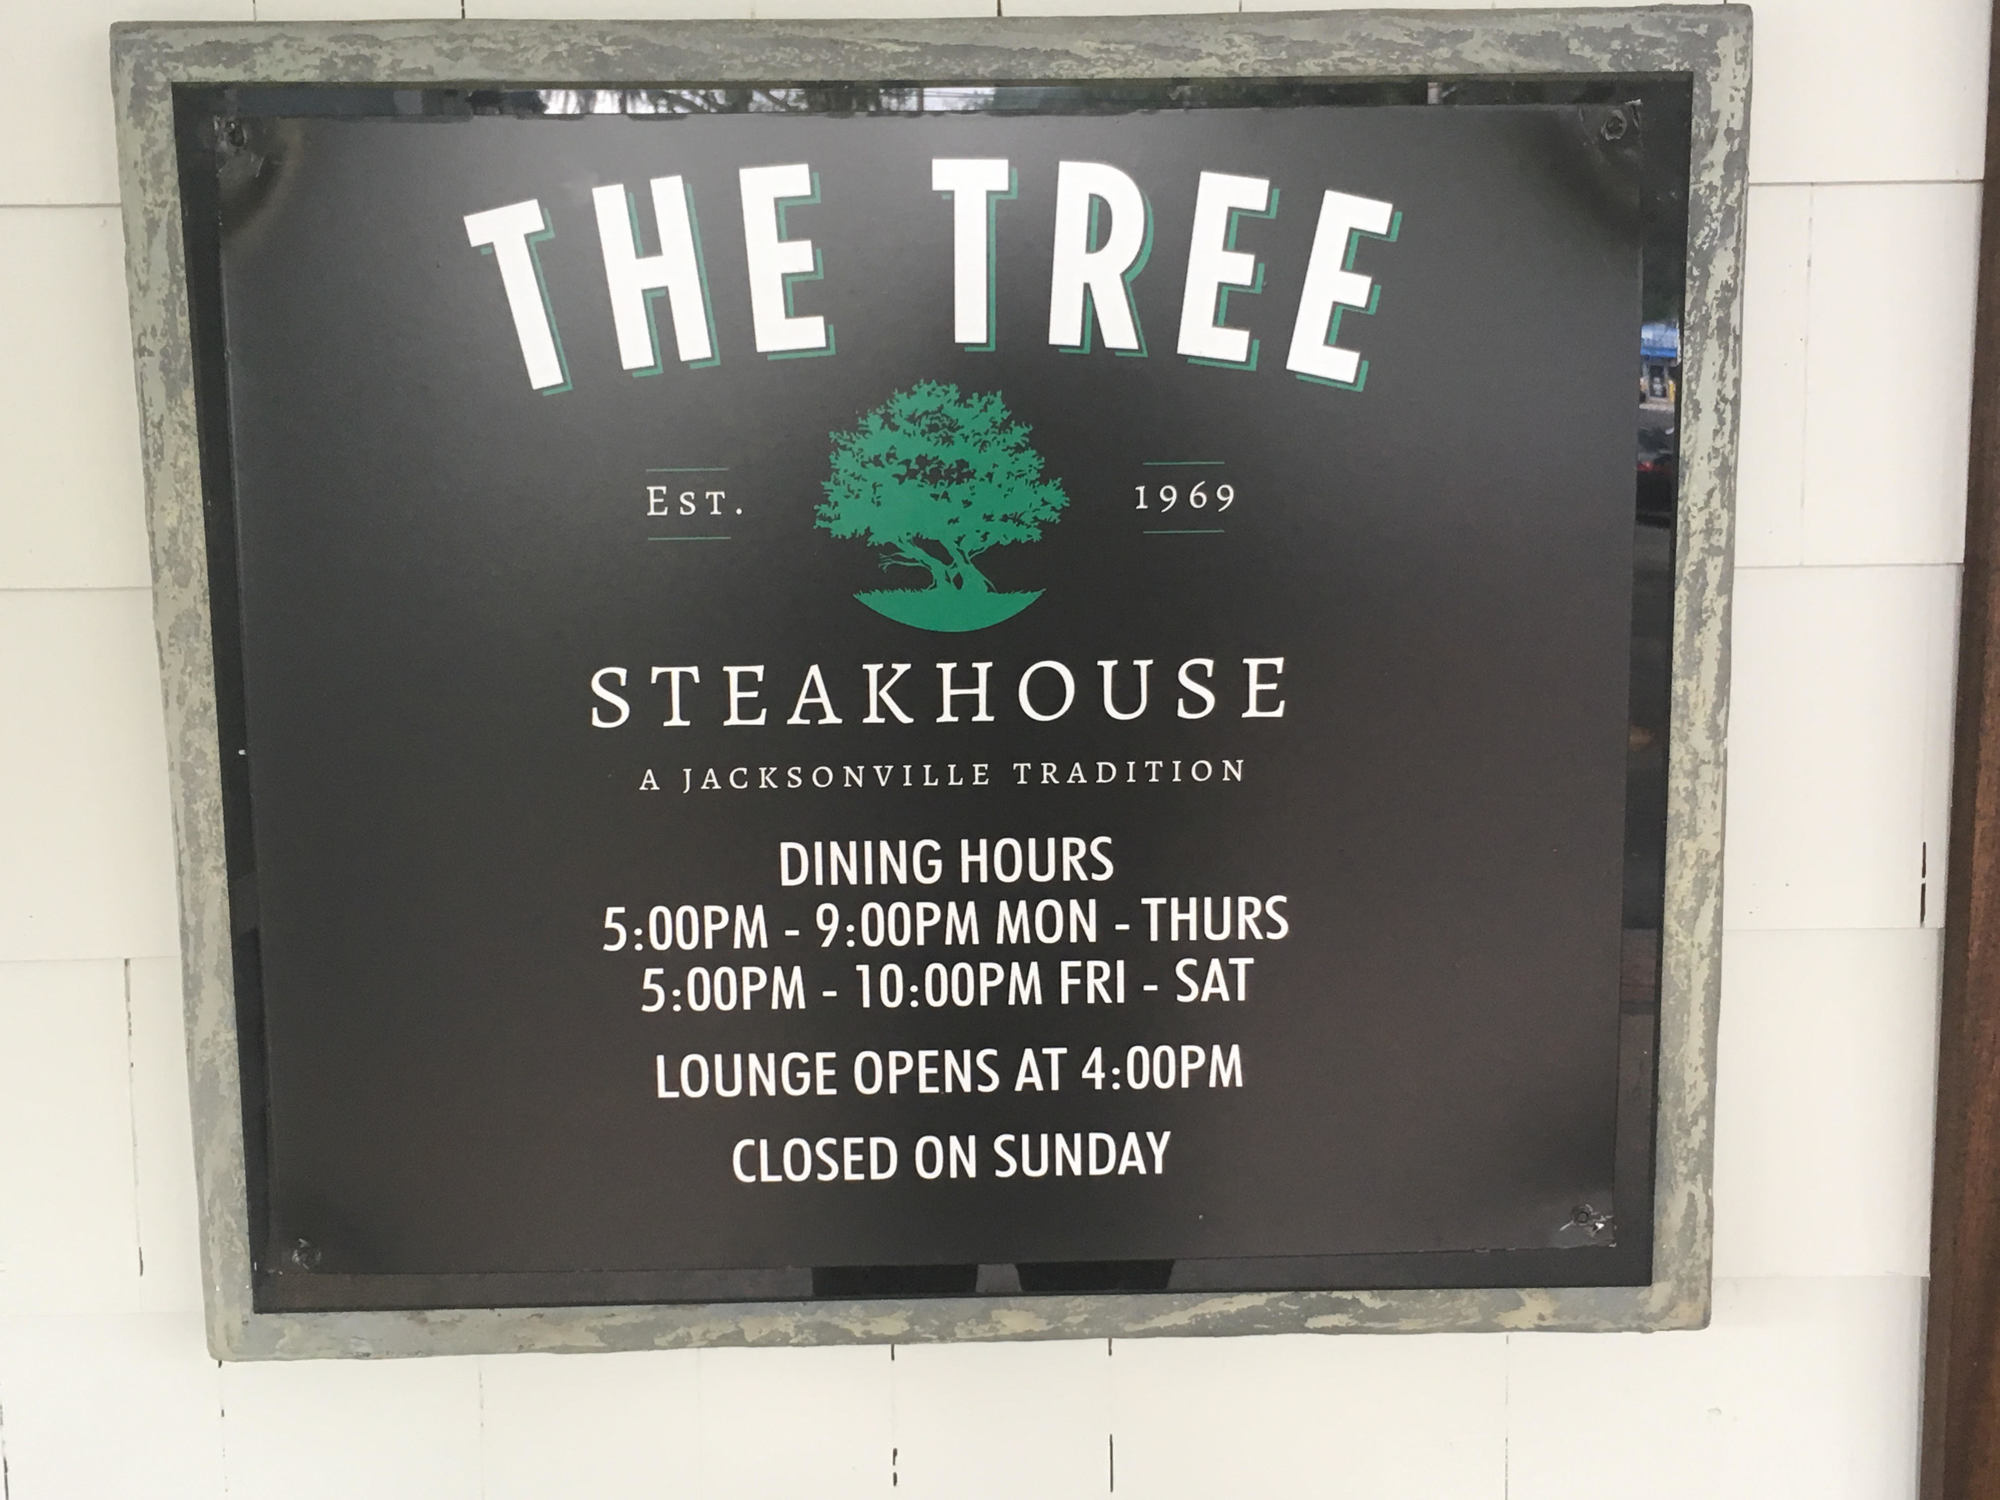 The Tree Steakhouse was established 50 years ago.